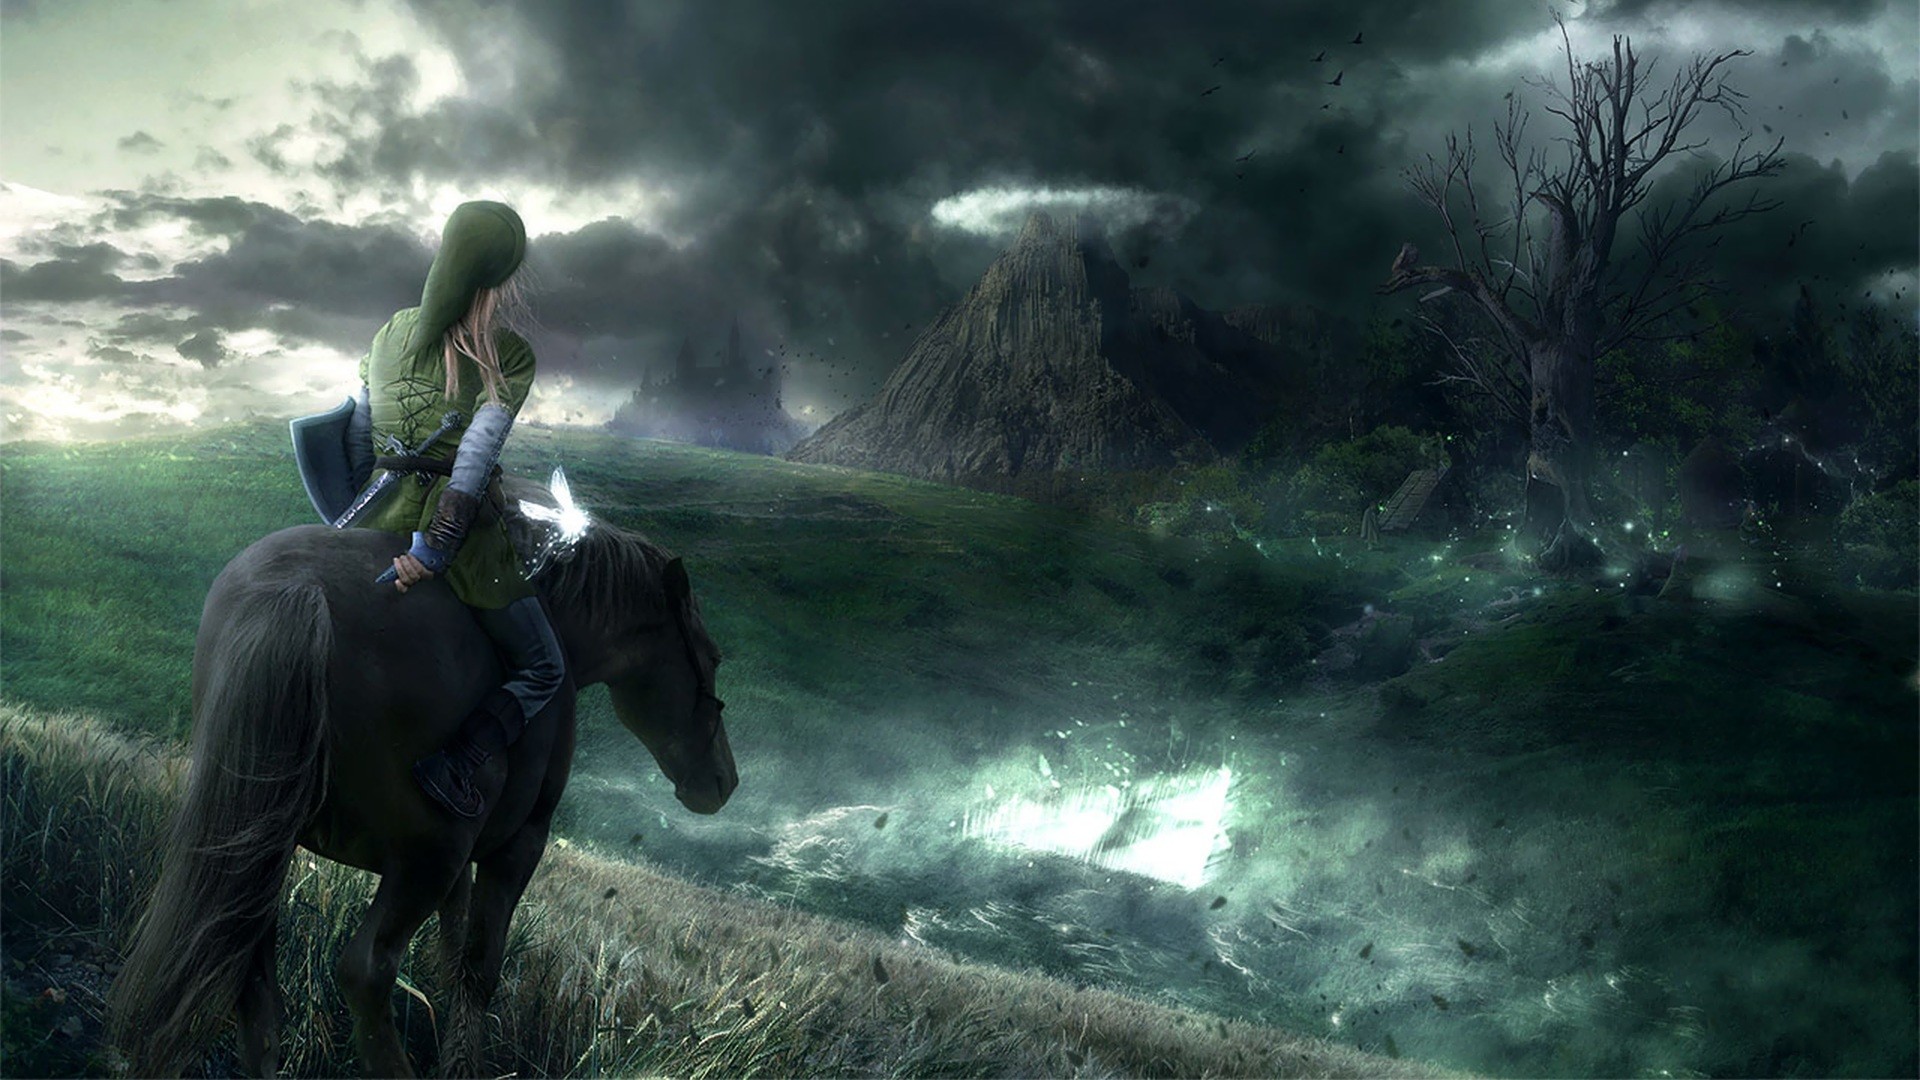 1920x1080 The Legend of Zelda Ocarina of Time Link and Epona looking at Death Mountain